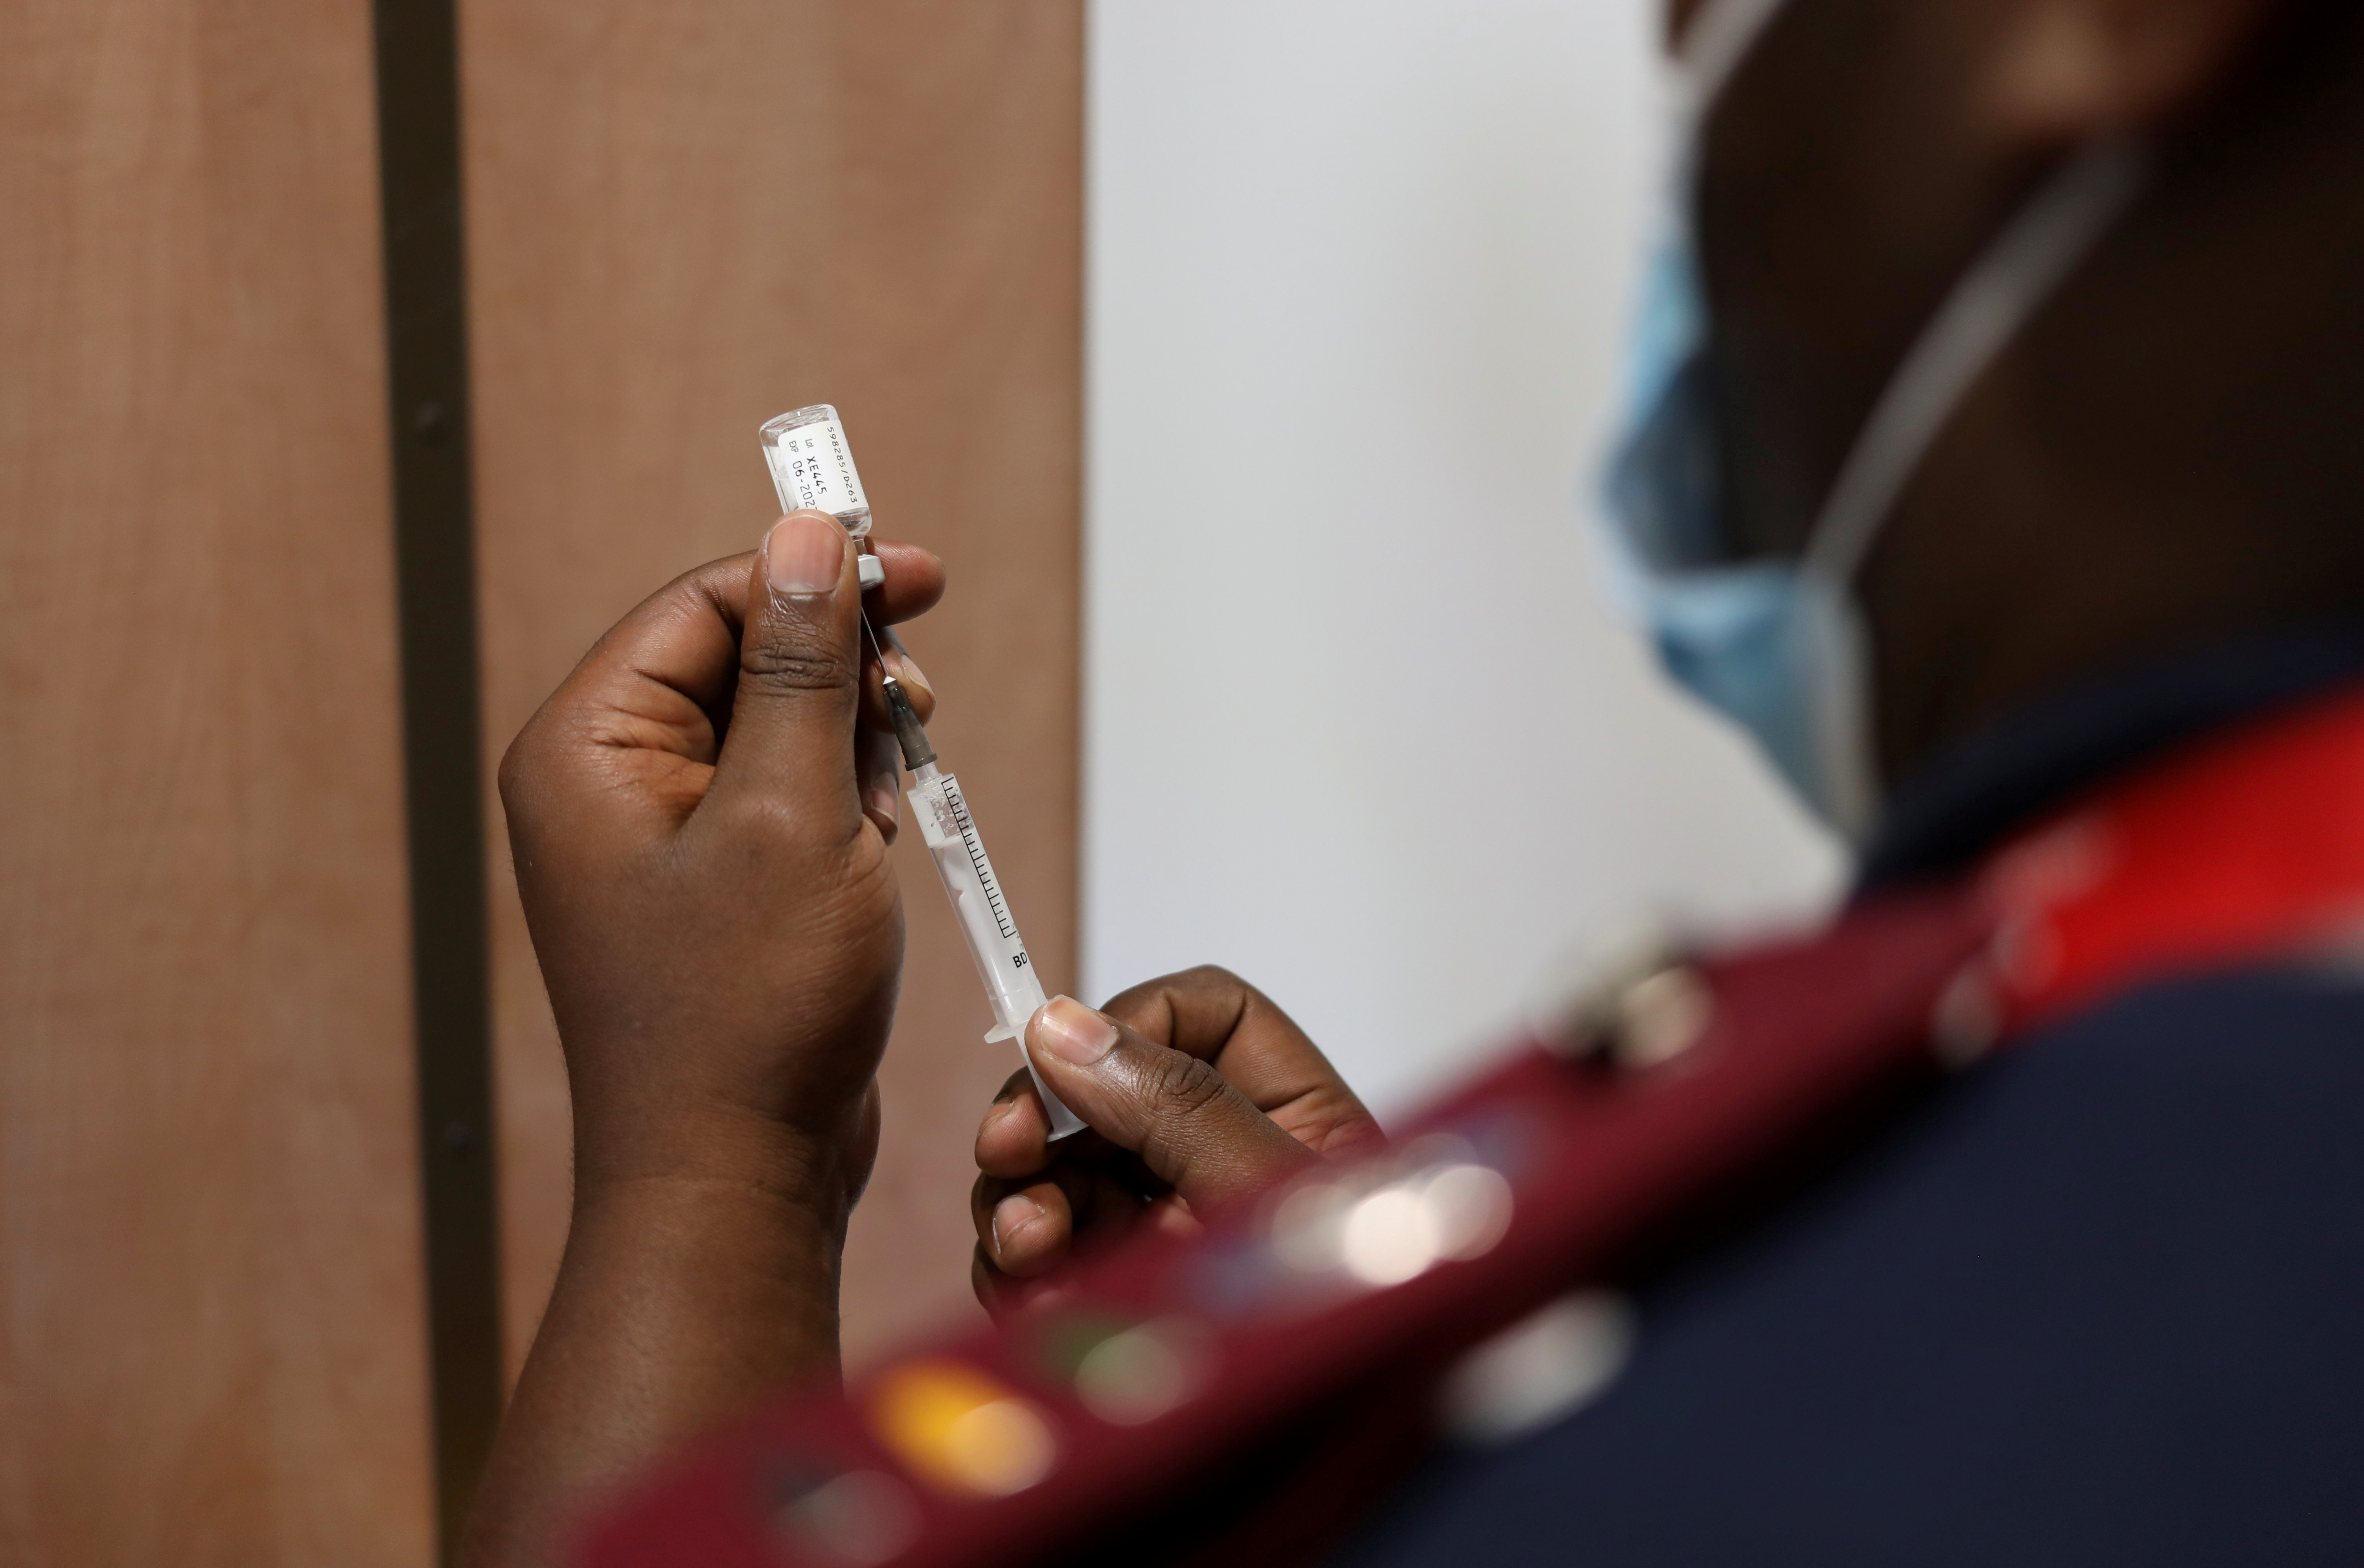 A nurse prepares a dose of the coronavirus disease (COVID-19) vaccine as the new Omicron variant spreads, in Dutywa, in the Eastern Cape province, South Africa November 29, 2021. REUTERS/Siphiwe Sibeko